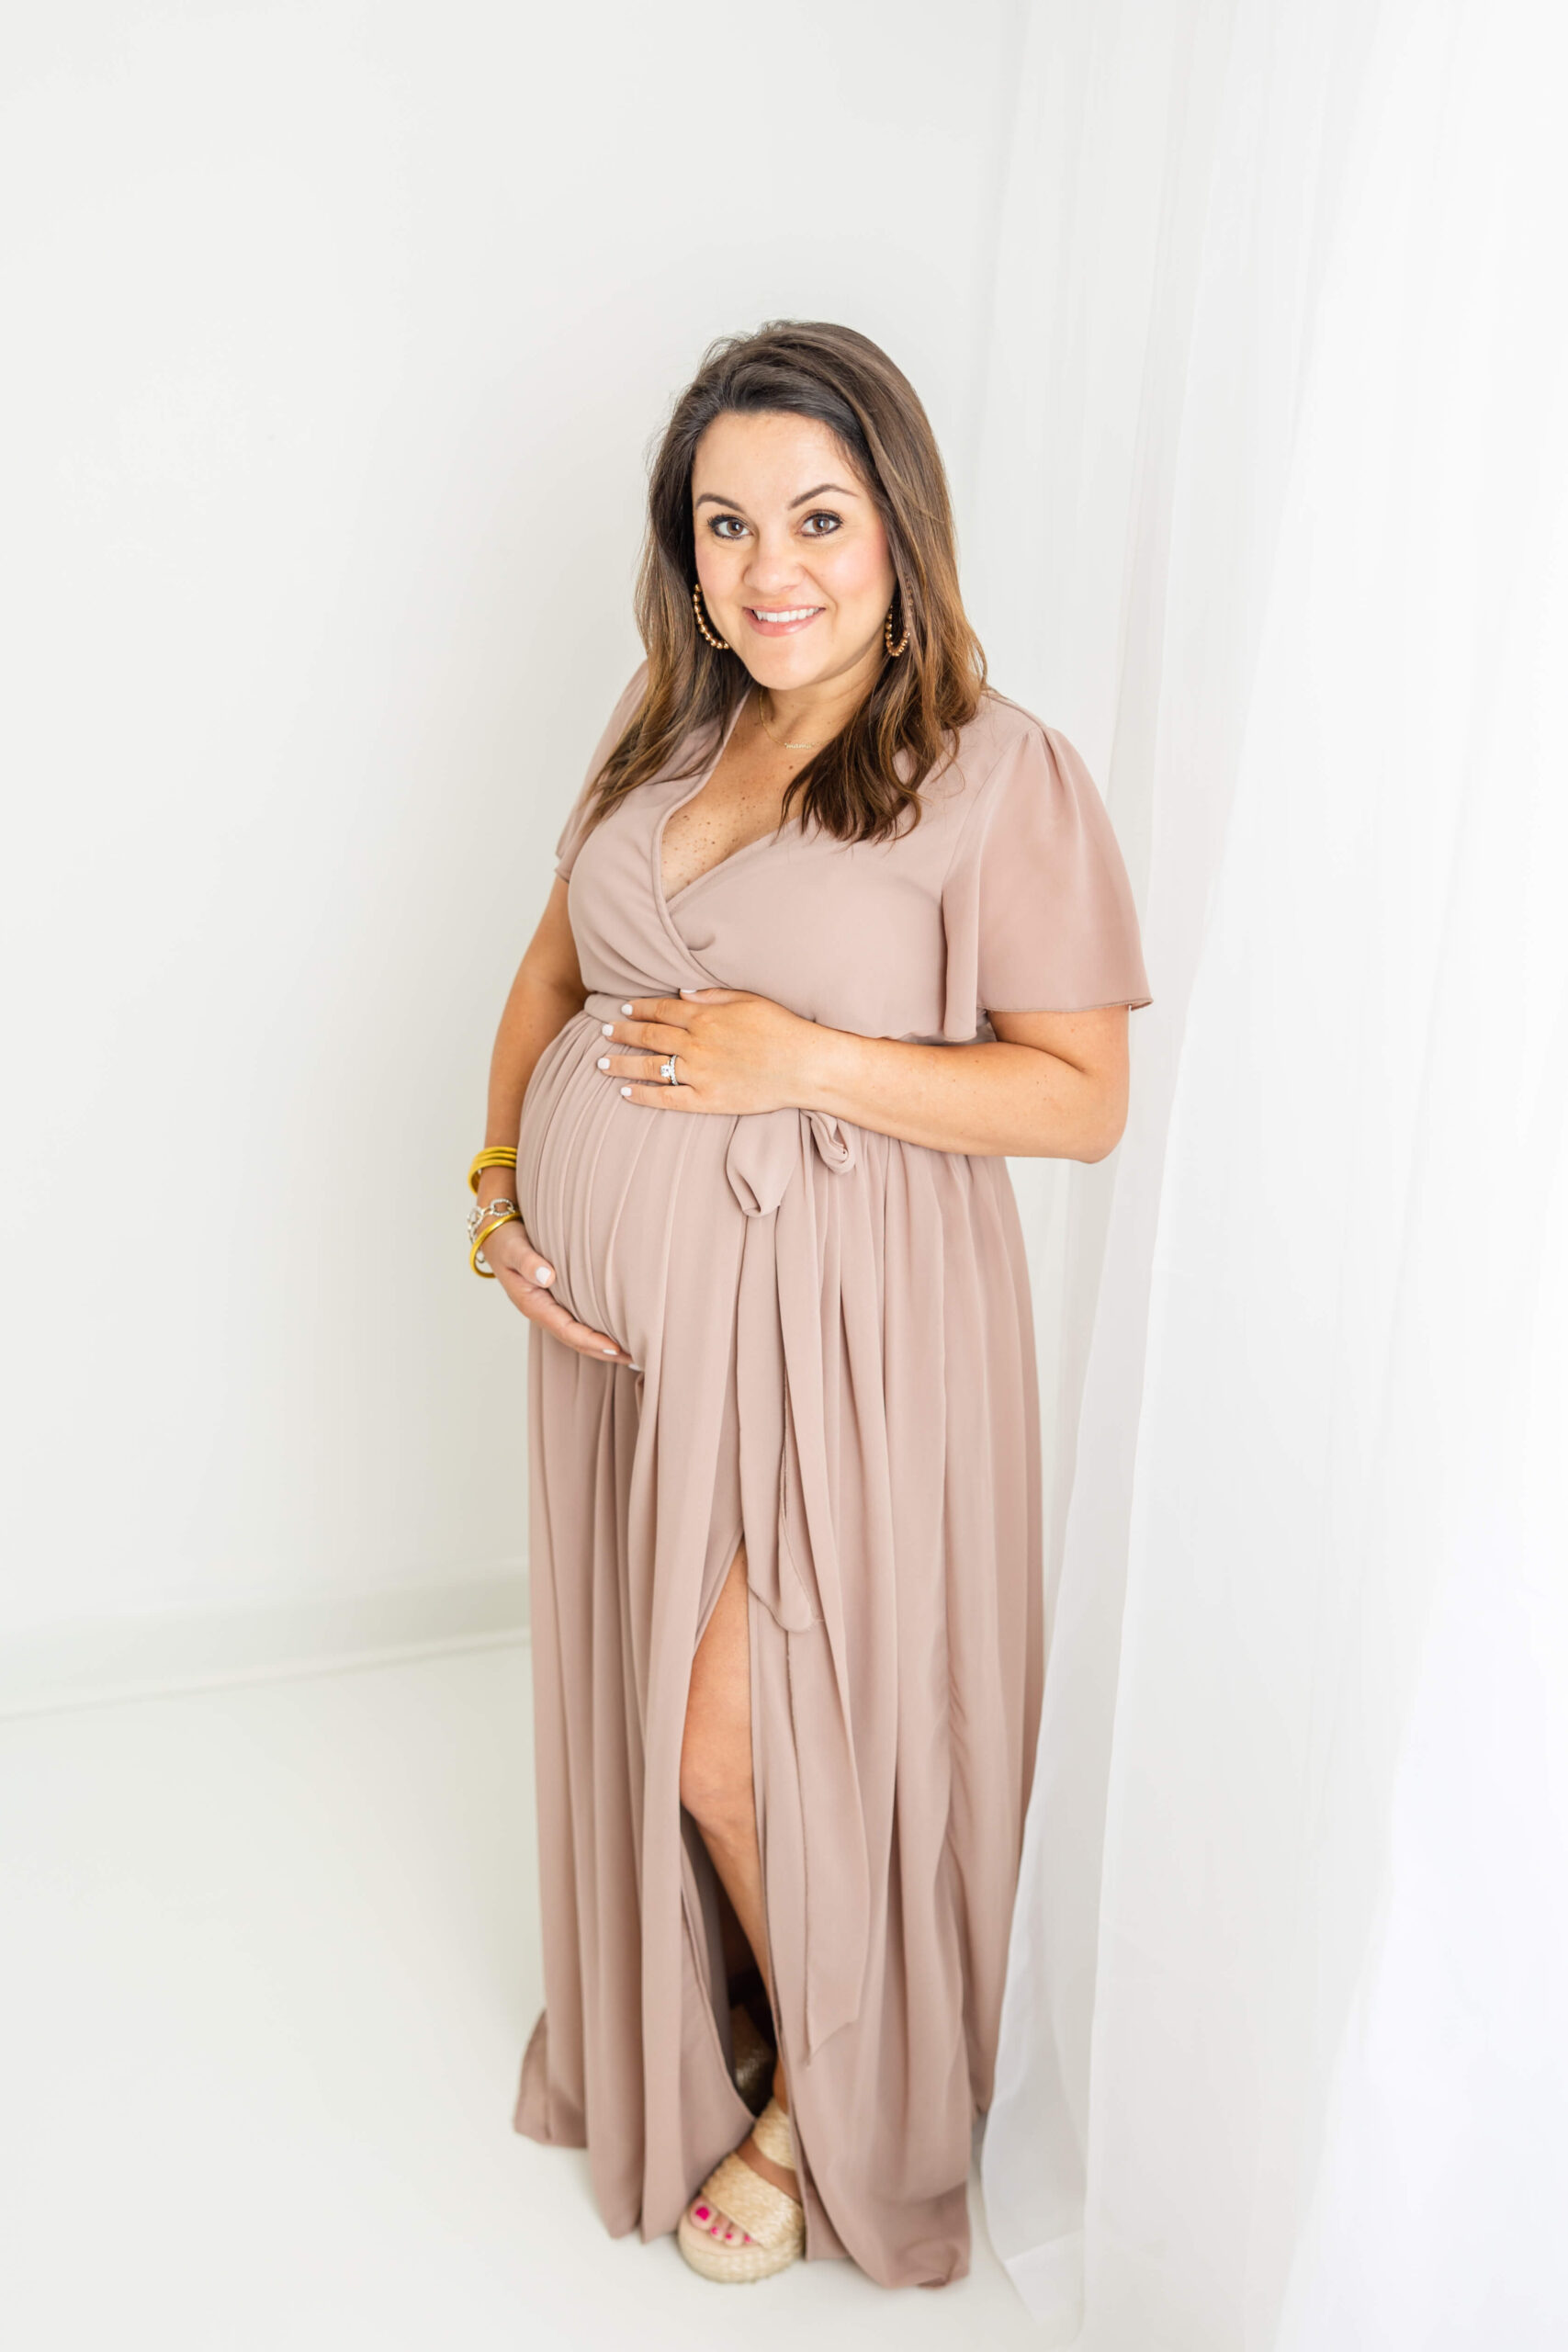 Soon to be mom wearing a full length mauve dress shows her baby bump.
